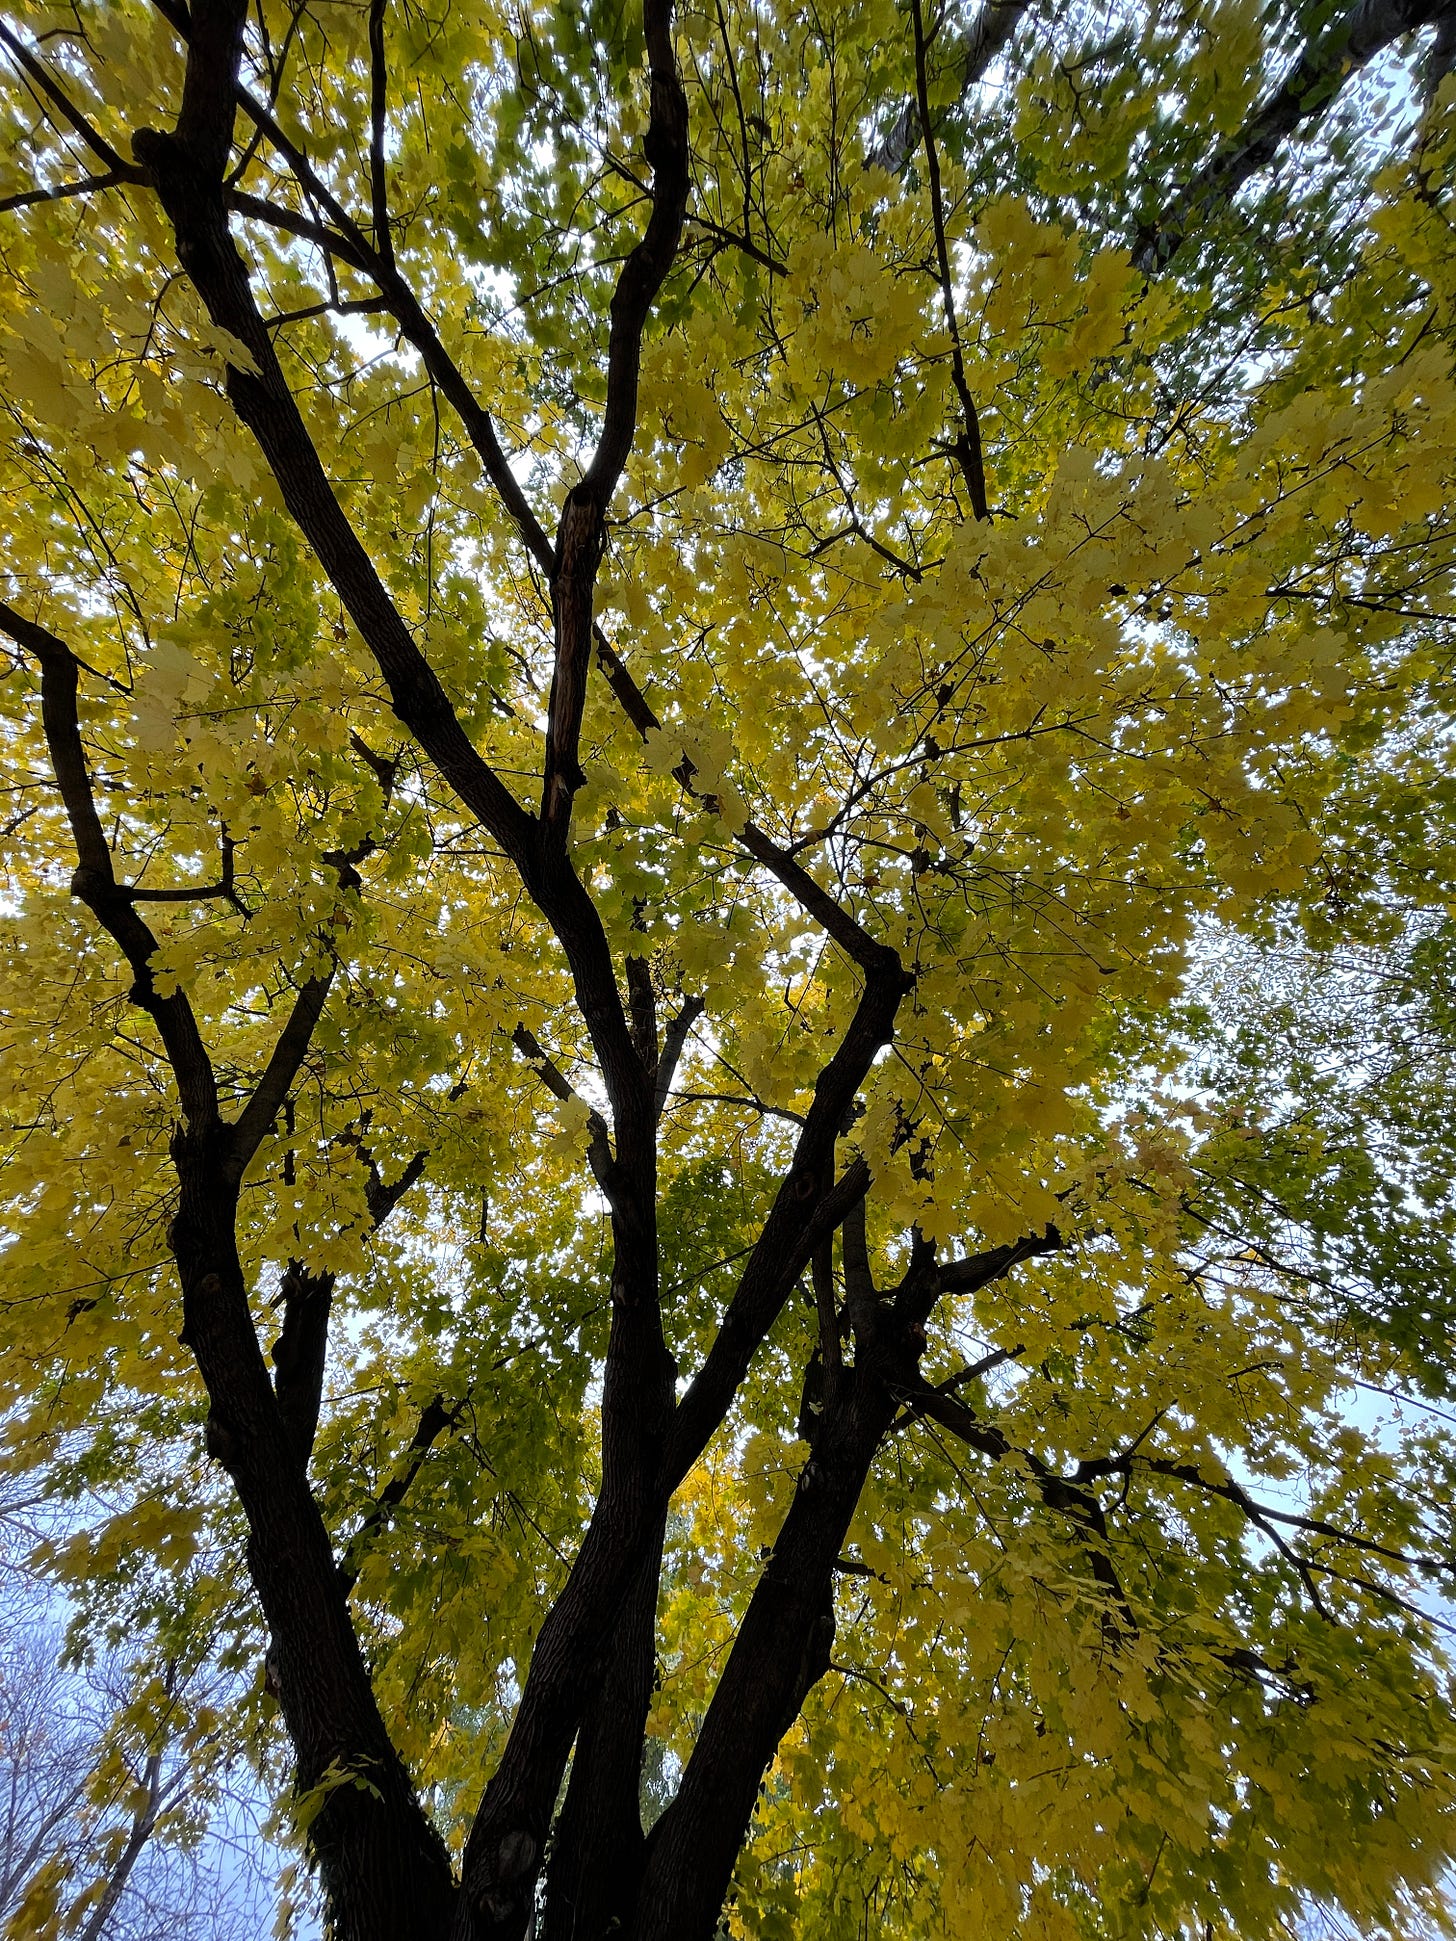 A tall tree photographed from below it looking up, with yellow green leaves and black branches against a light blue dusk sky